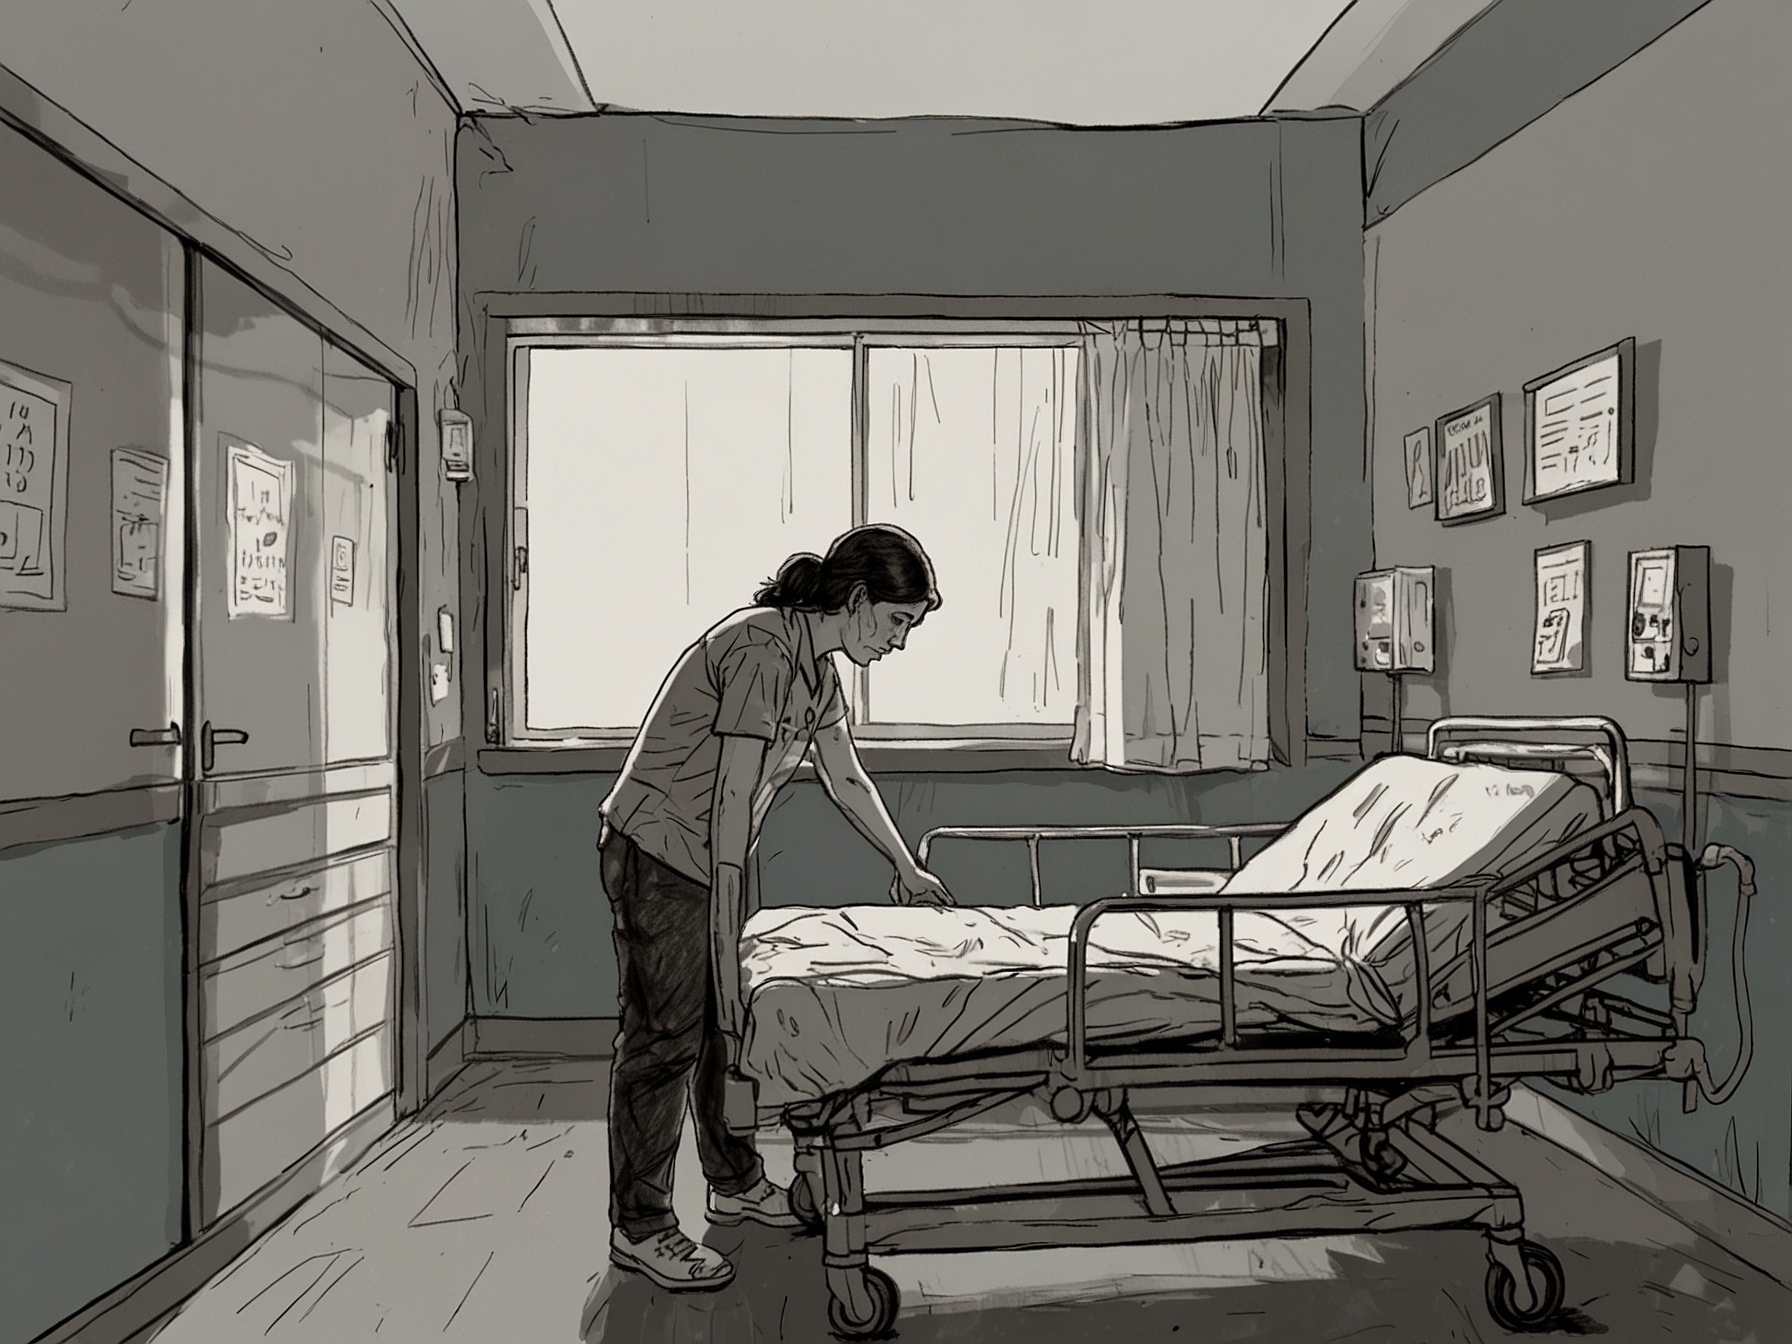 A distraught woman standing next to a hospital bed, holding her husband's hand, showing the emotional toll and resilience as he fights for recovery in the Intensive Care Unit.